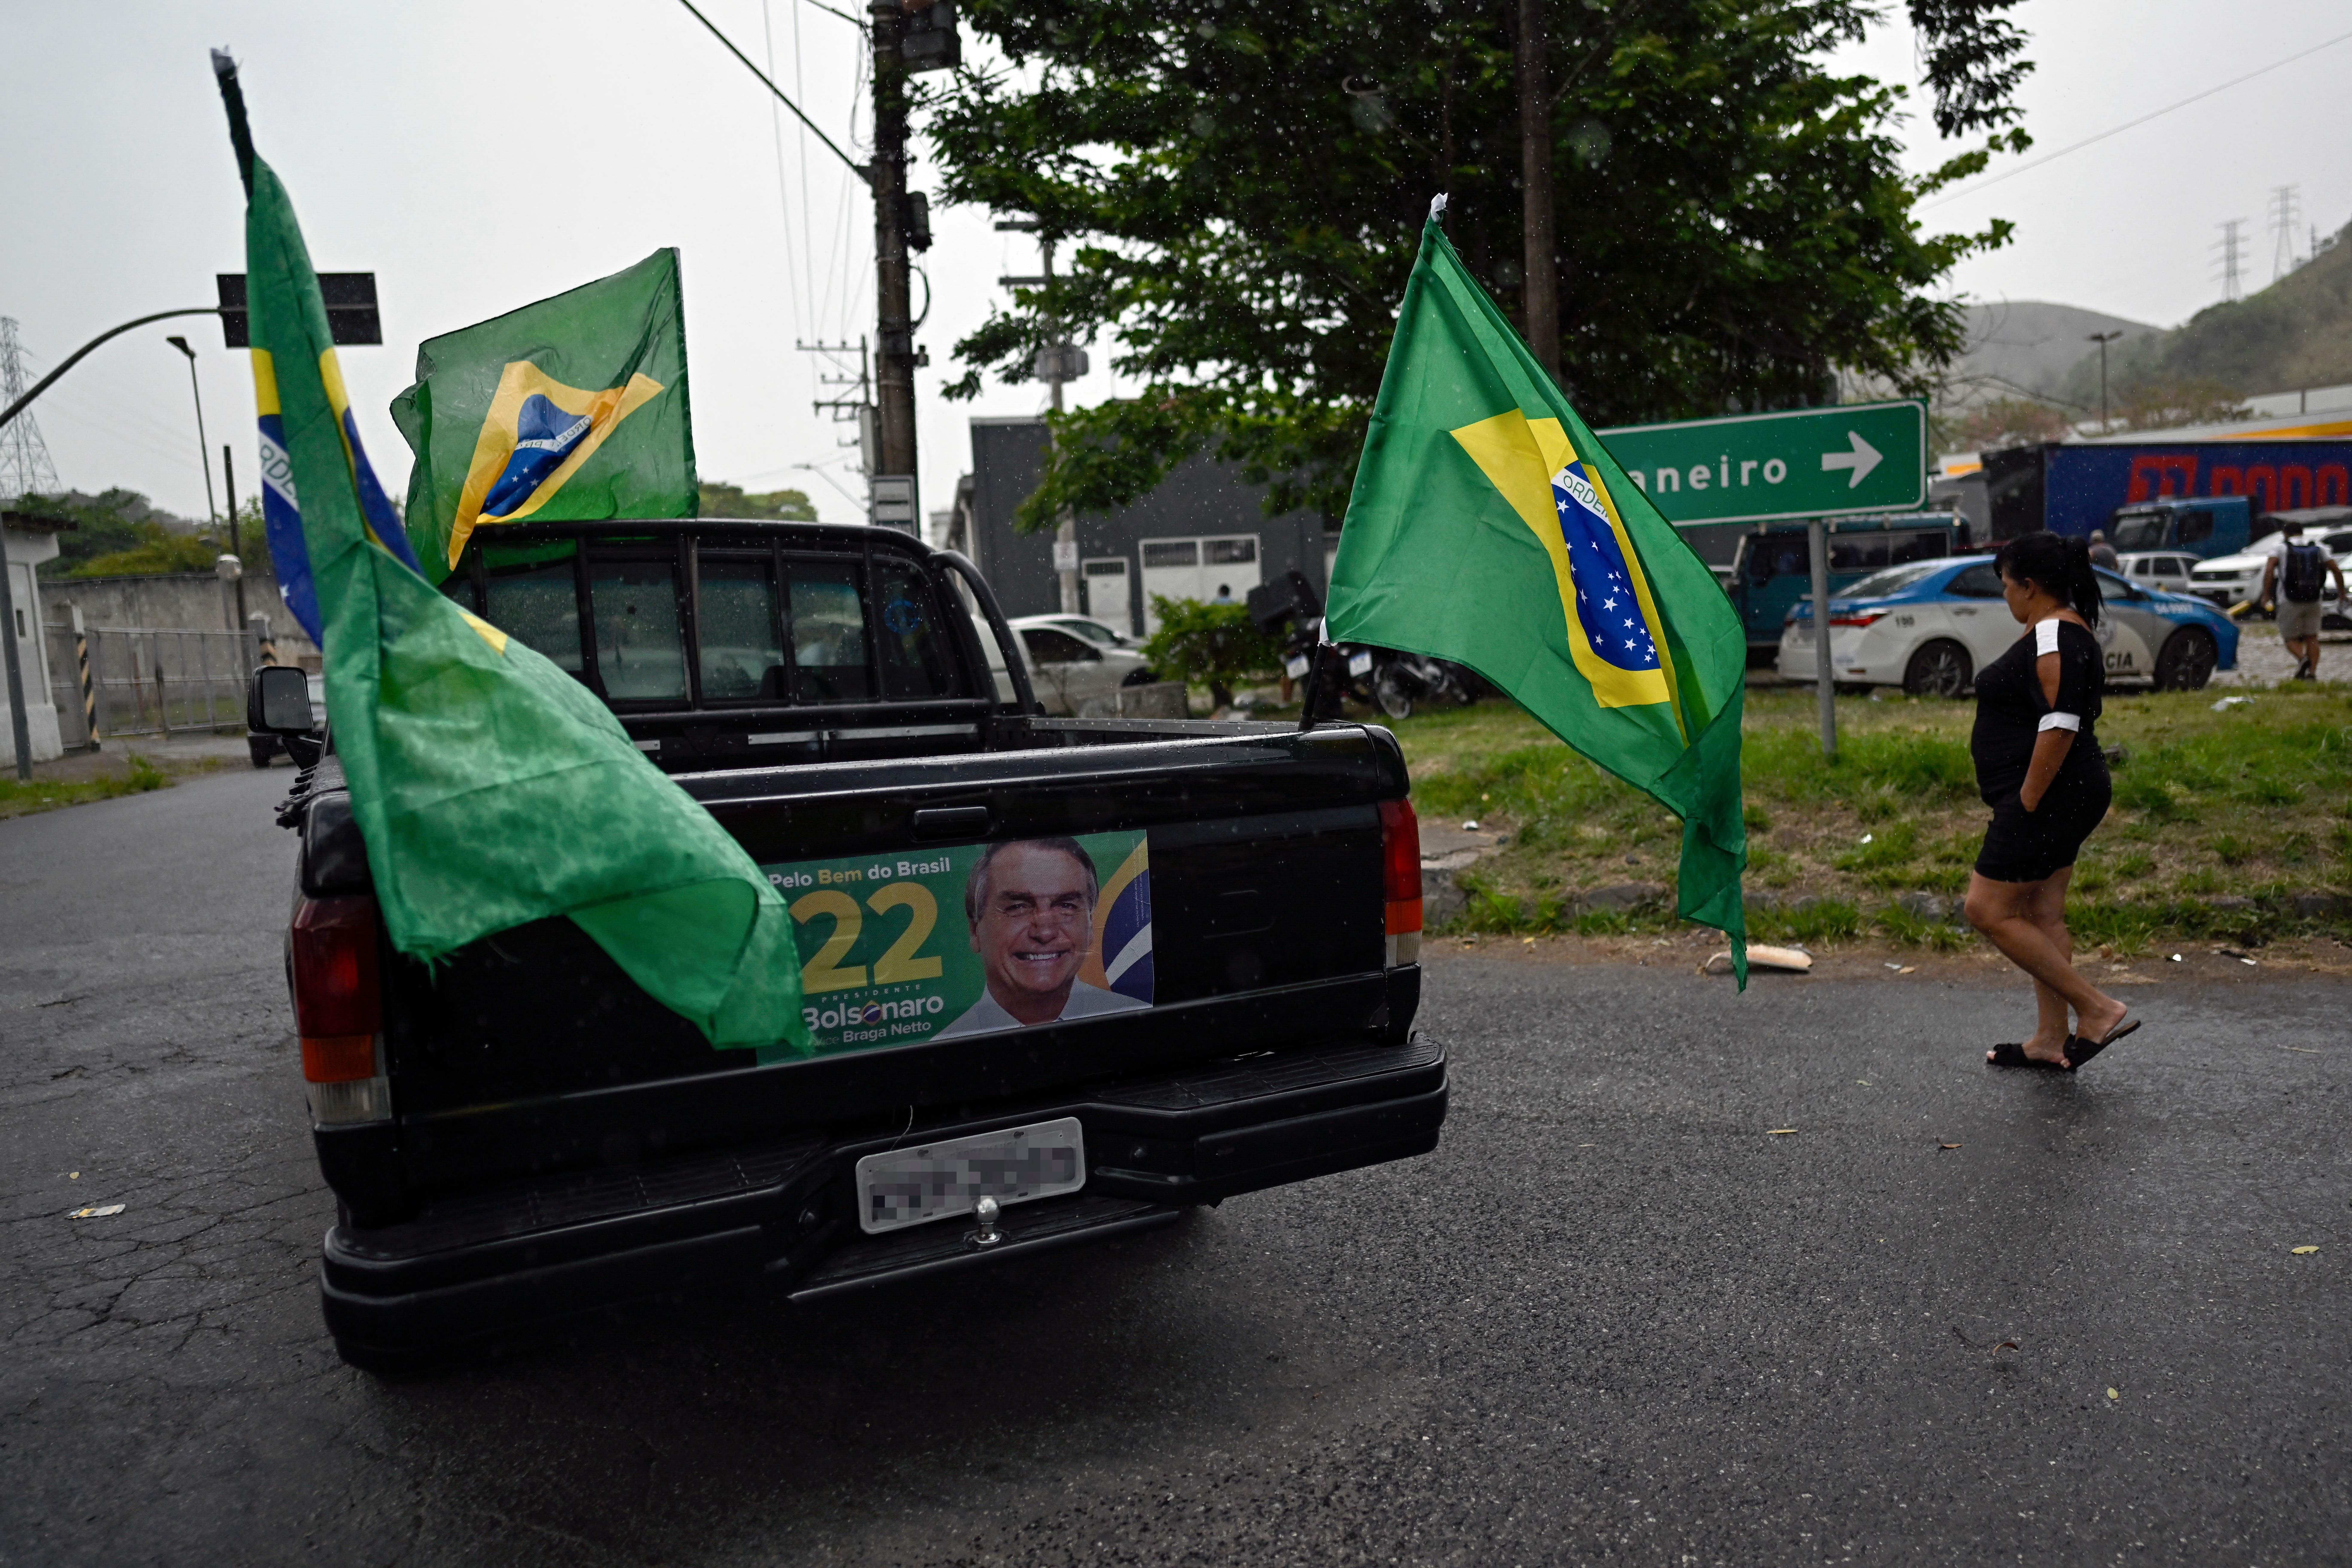 A pick-up truck displays Brazilian flags and political propaganda with an image of President Jair Bolsonaro